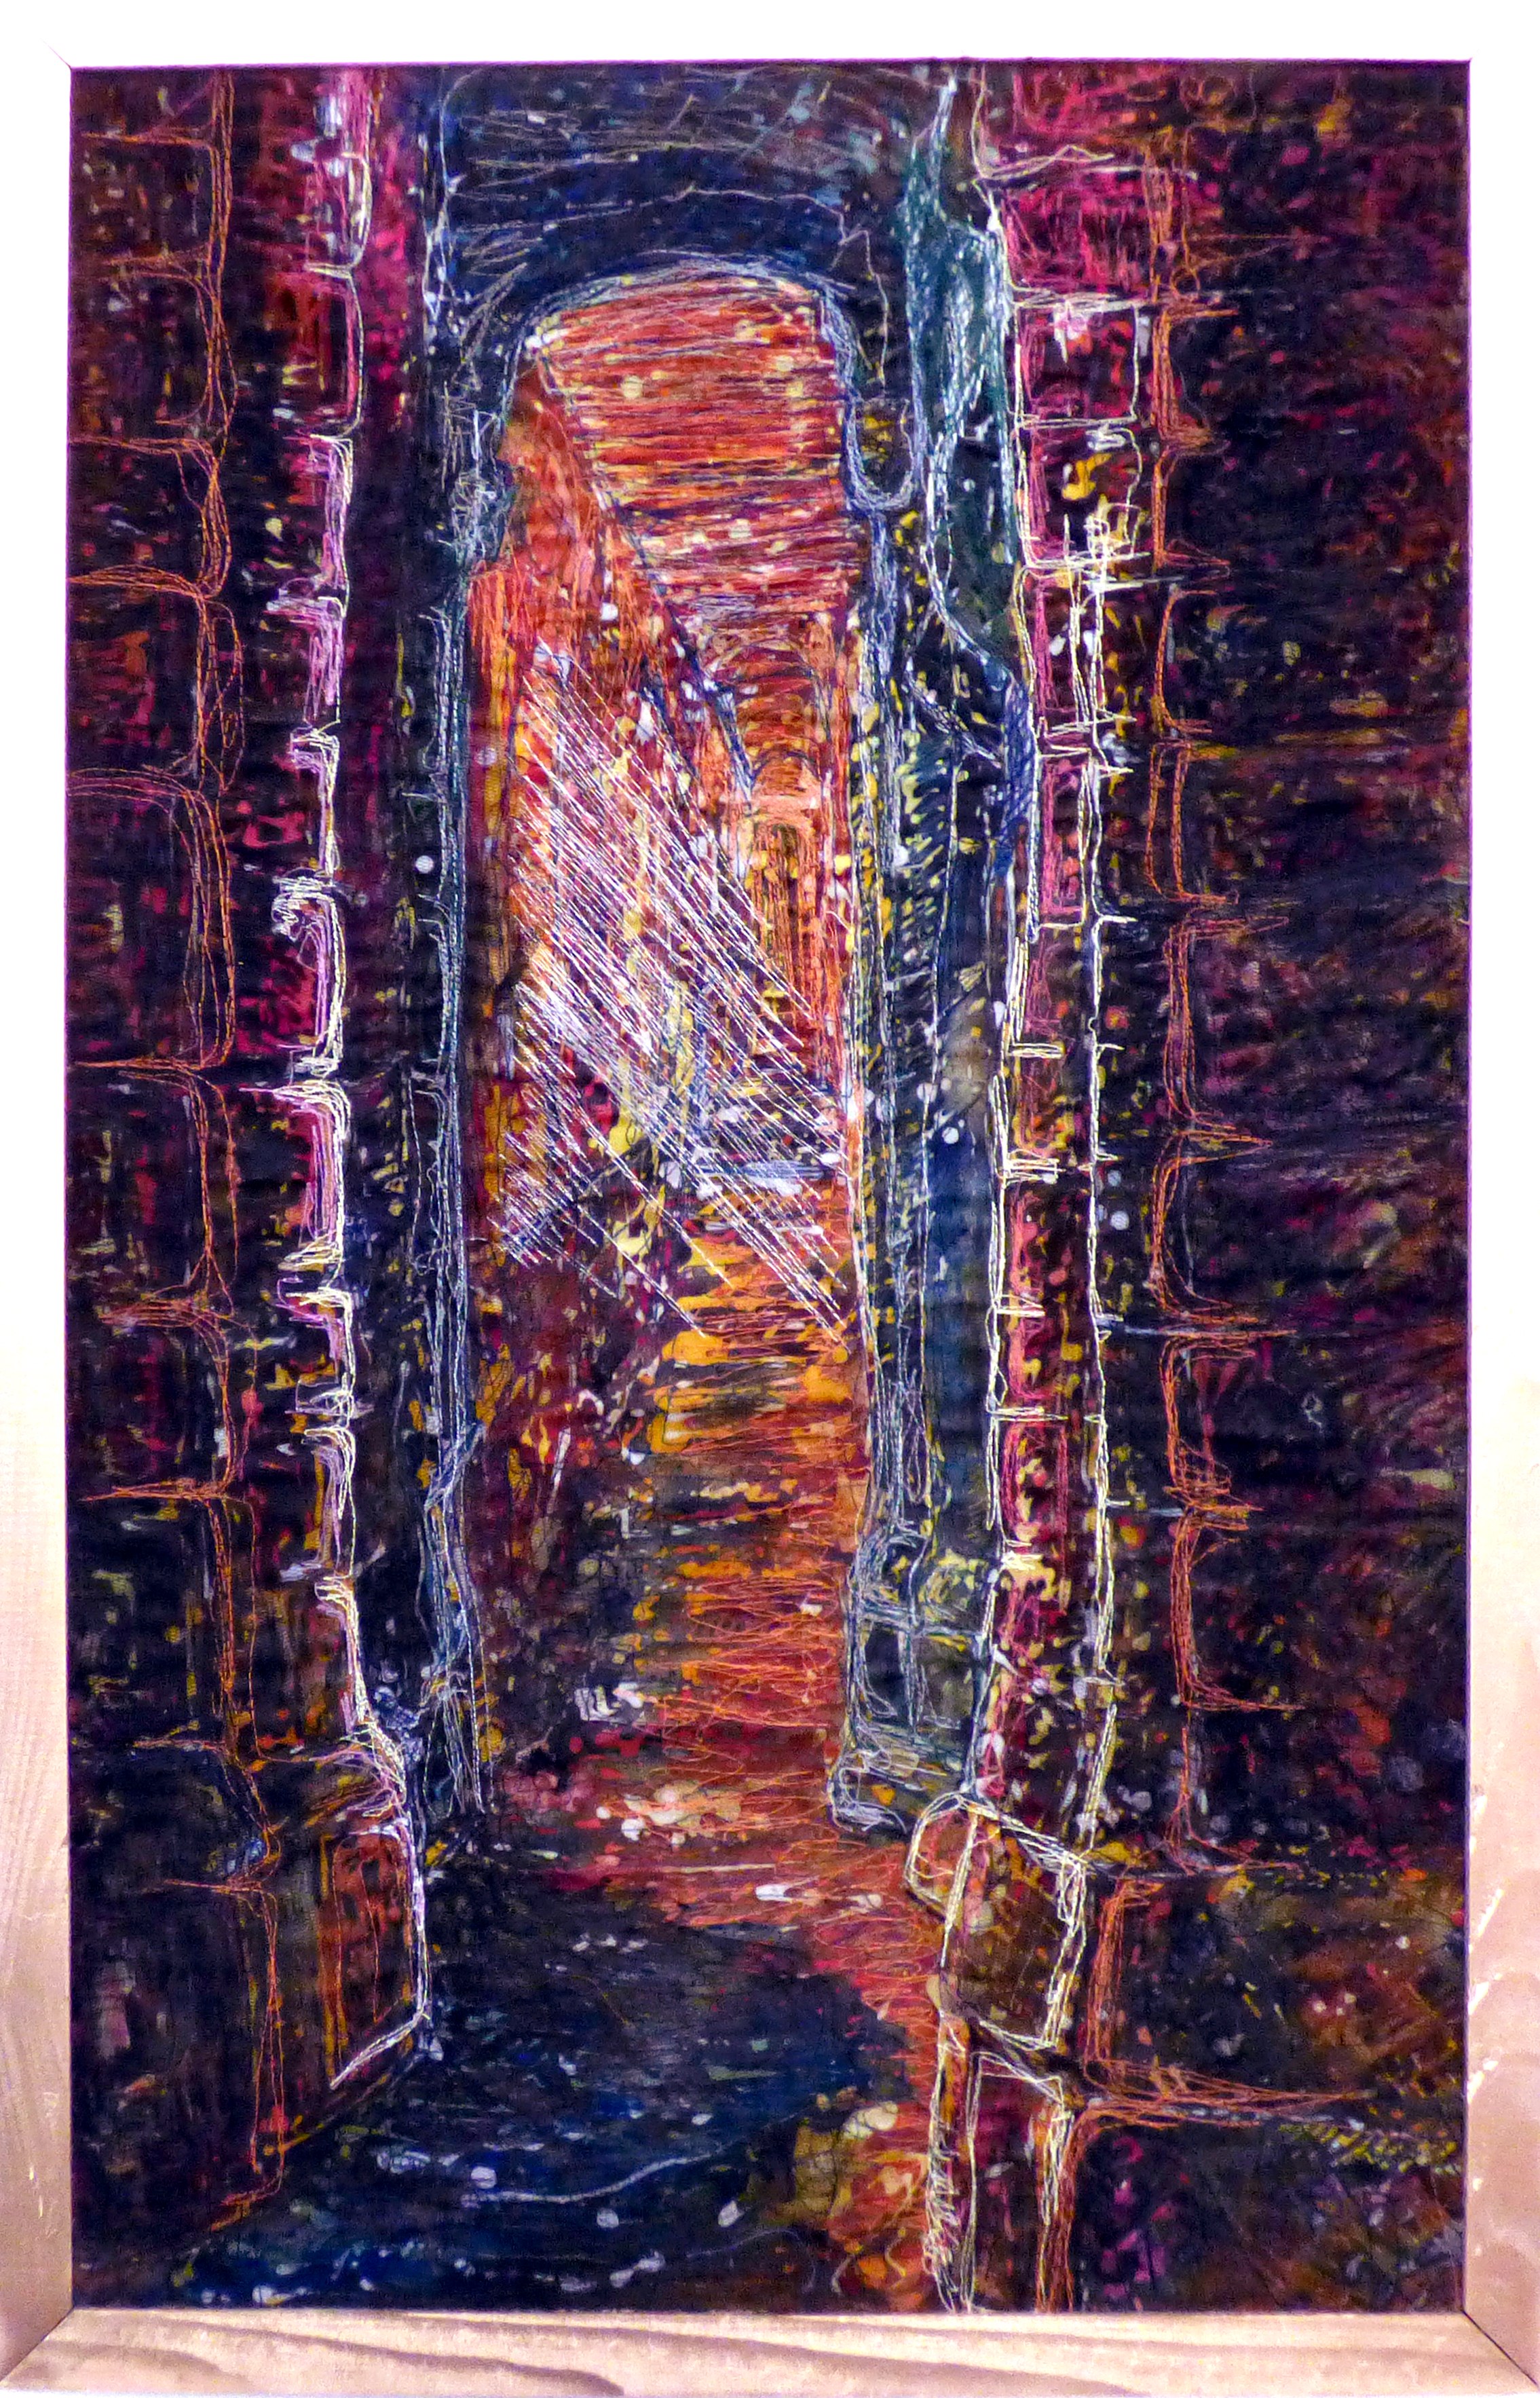 DARK AND LIGHT by Anne Johnson, batik, In All Its Glory exhibition, Chester Cathedral 2016